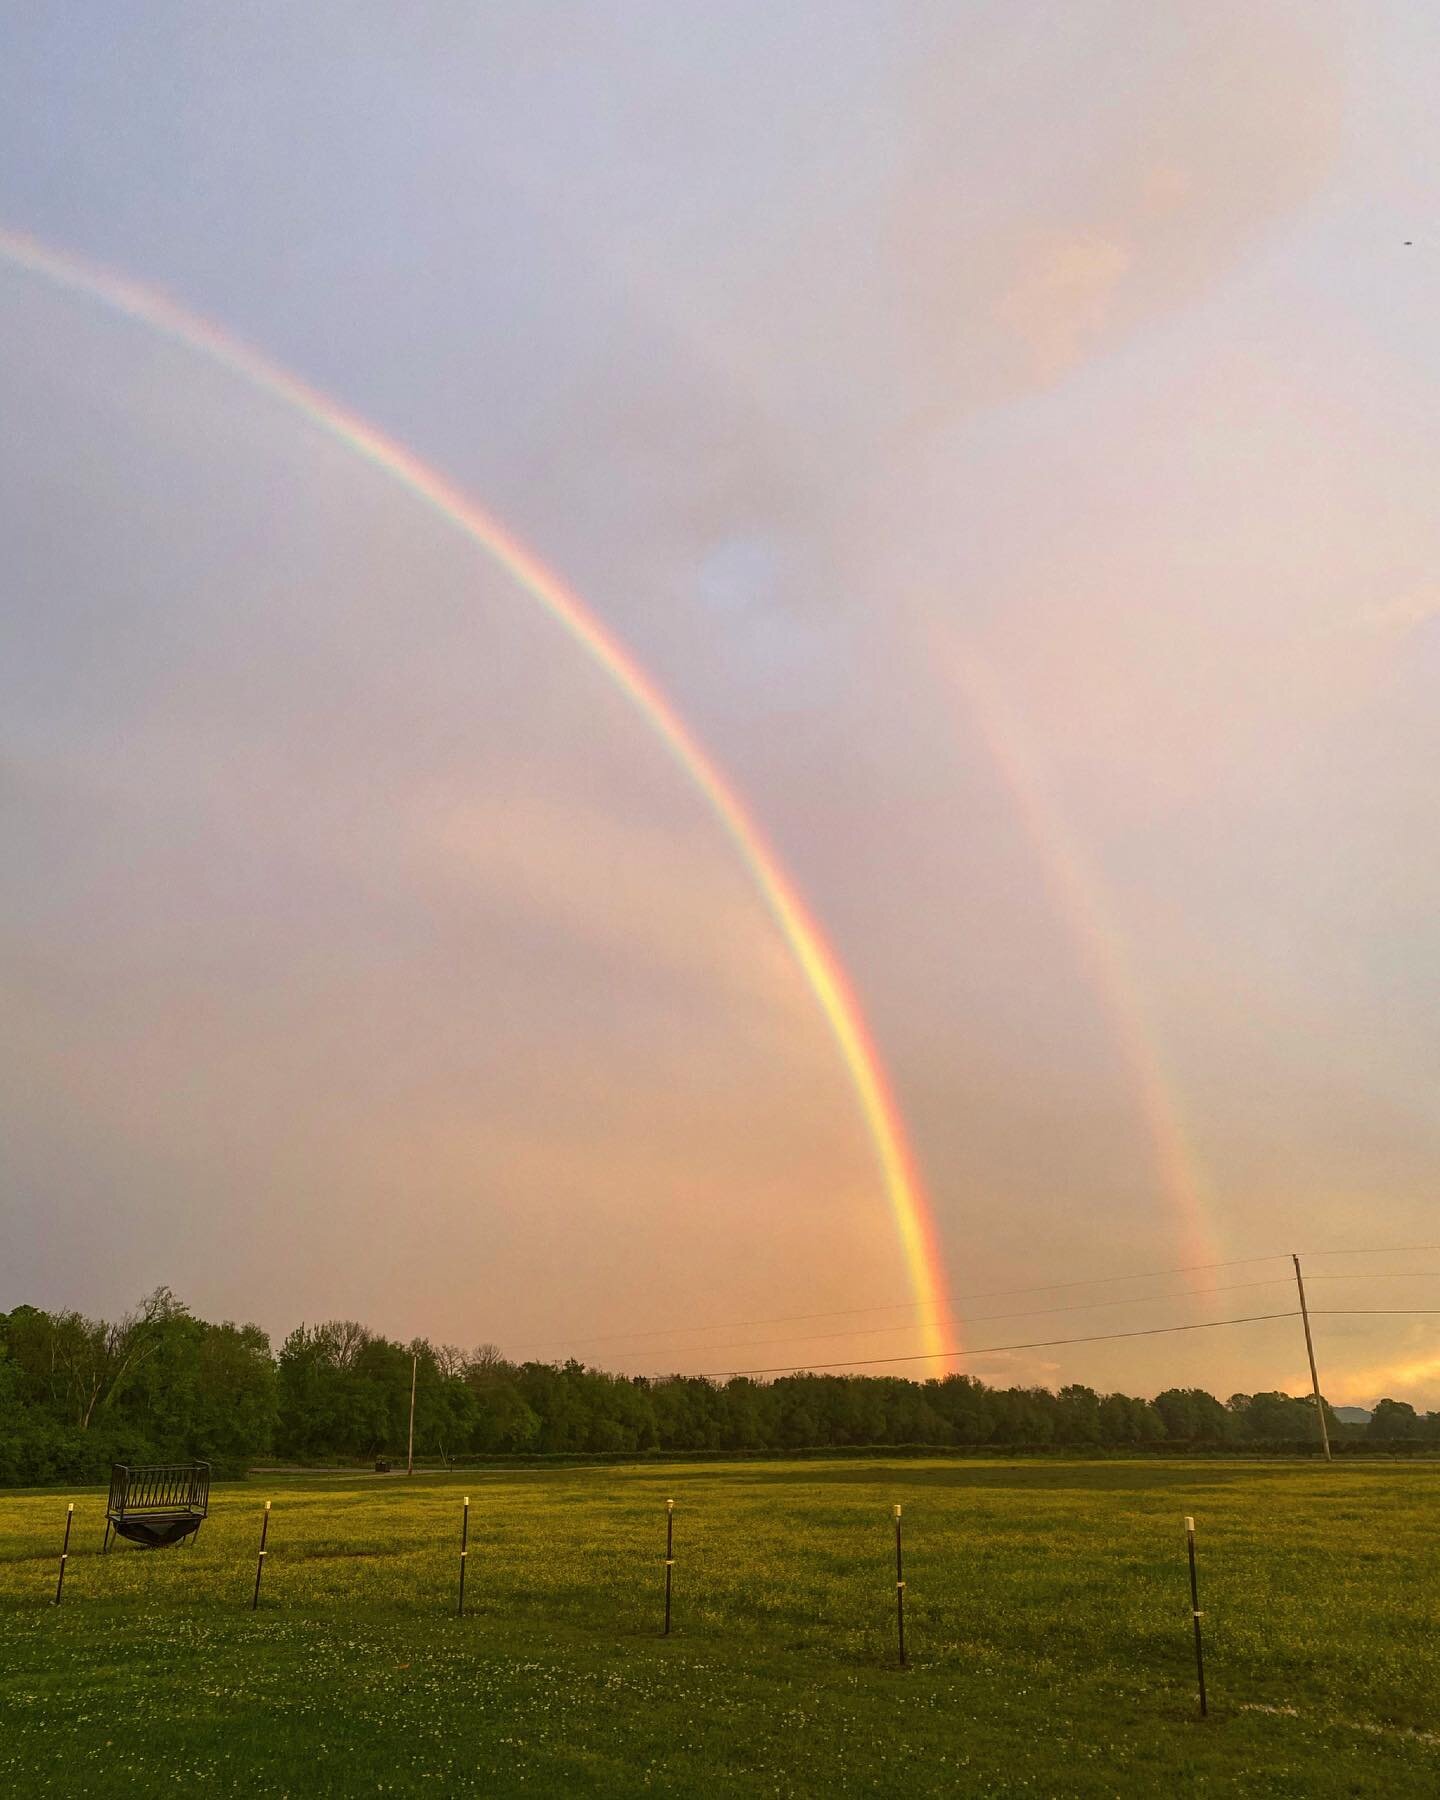 No filter needed. Y&rsquo;allllll... did anyone else catch this super bright double rainbow tonight here in middle TN?! I saw the complete arch. I am always in awe by a rainbow. 🌈 God keeps His promises. 🙏
.
&ldquo;As I journey here mid the toils a